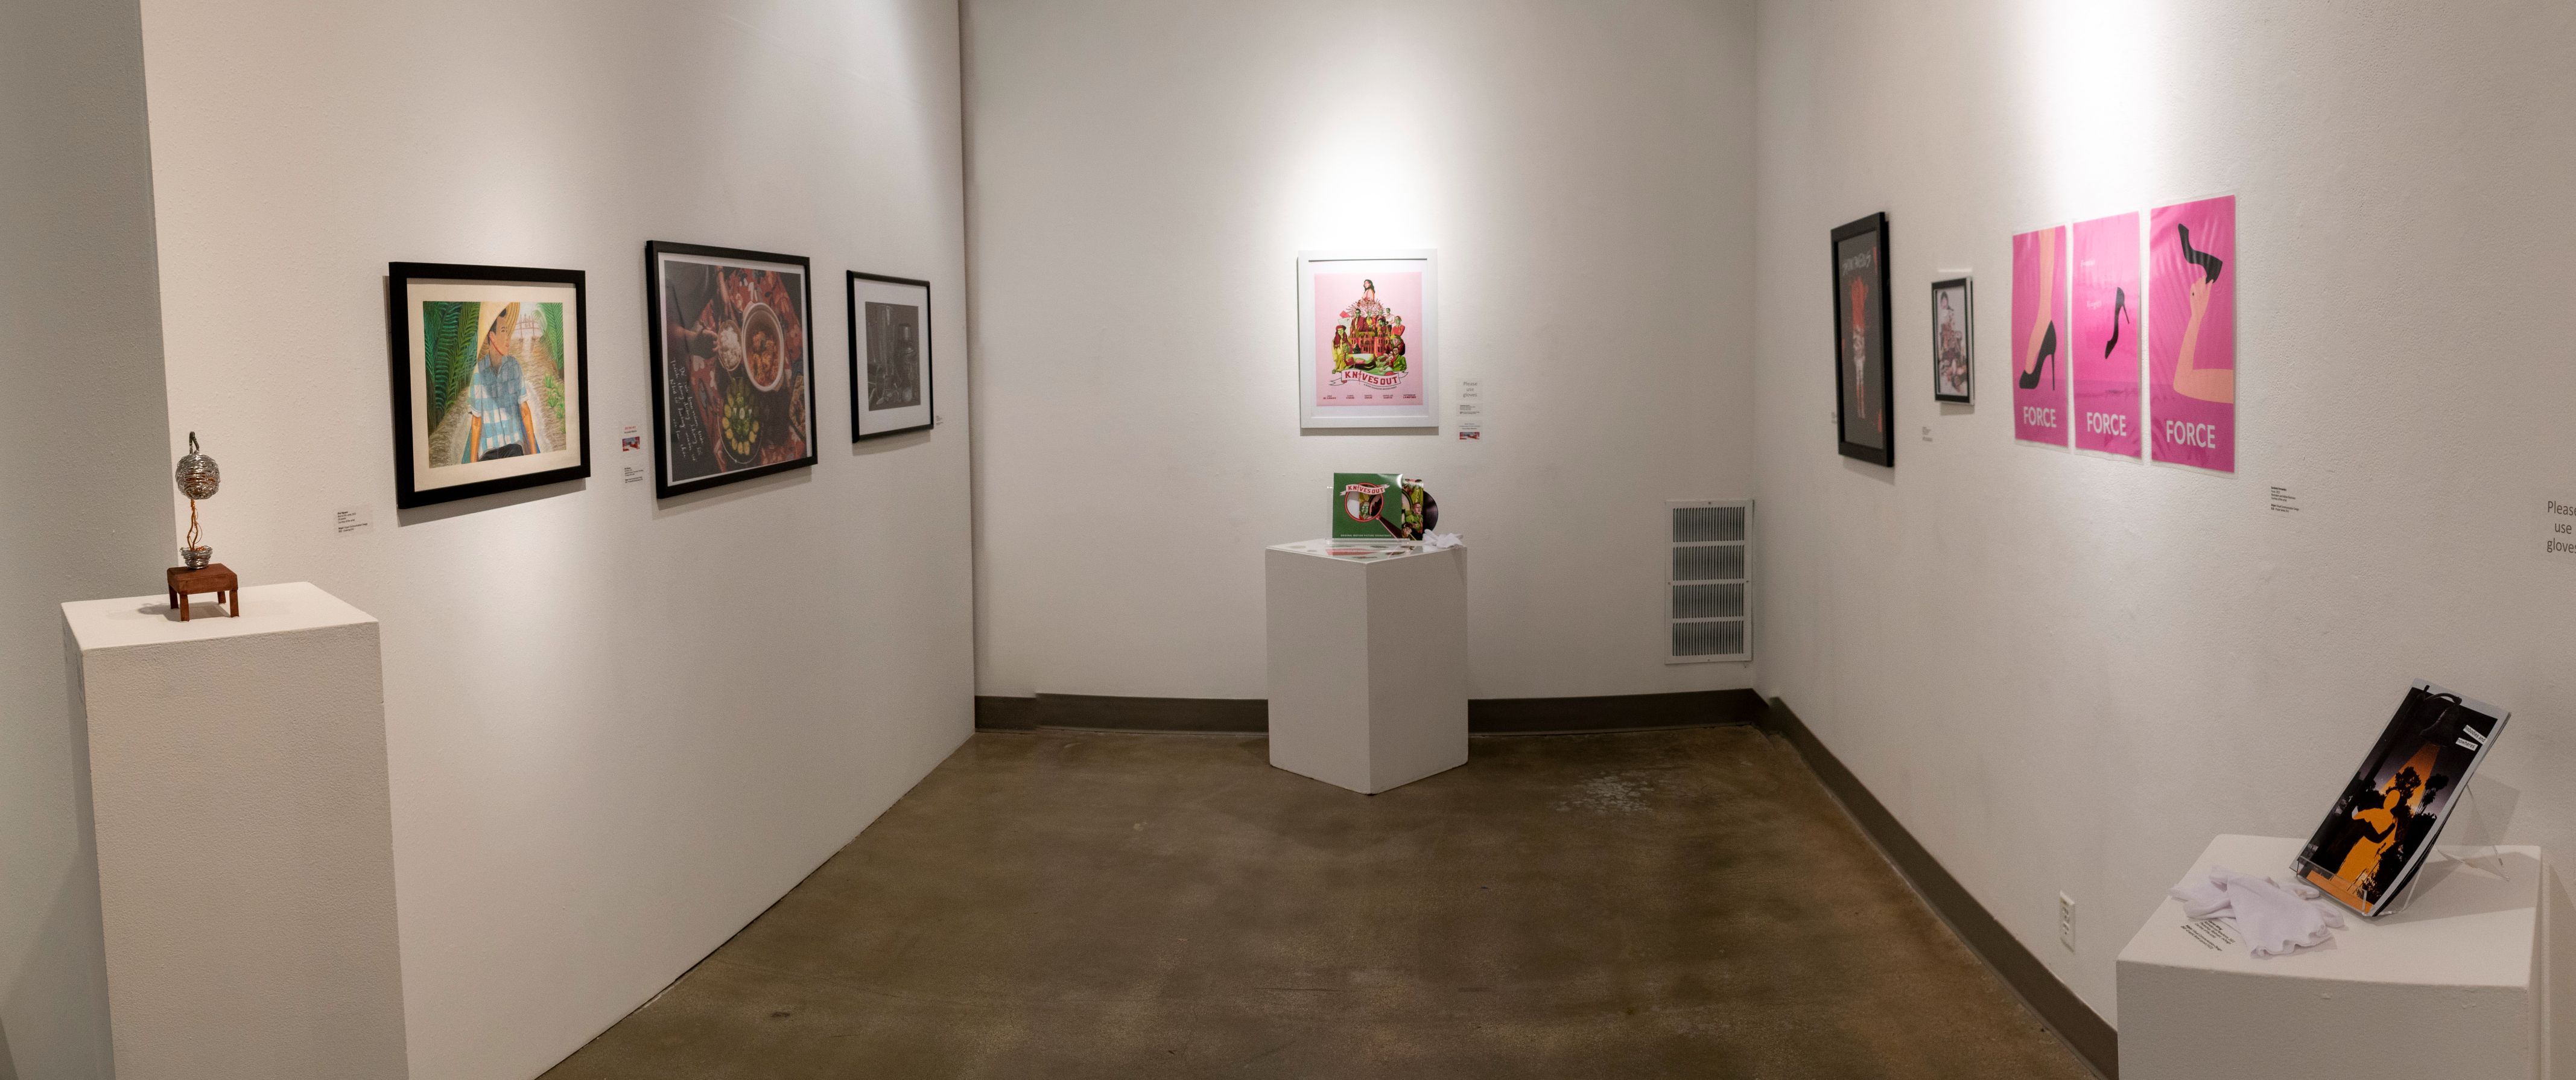 Installation View, Front West Gallery, Poly Kroma 2022 Exhibition, April 28, 2022 to May 22, 2022